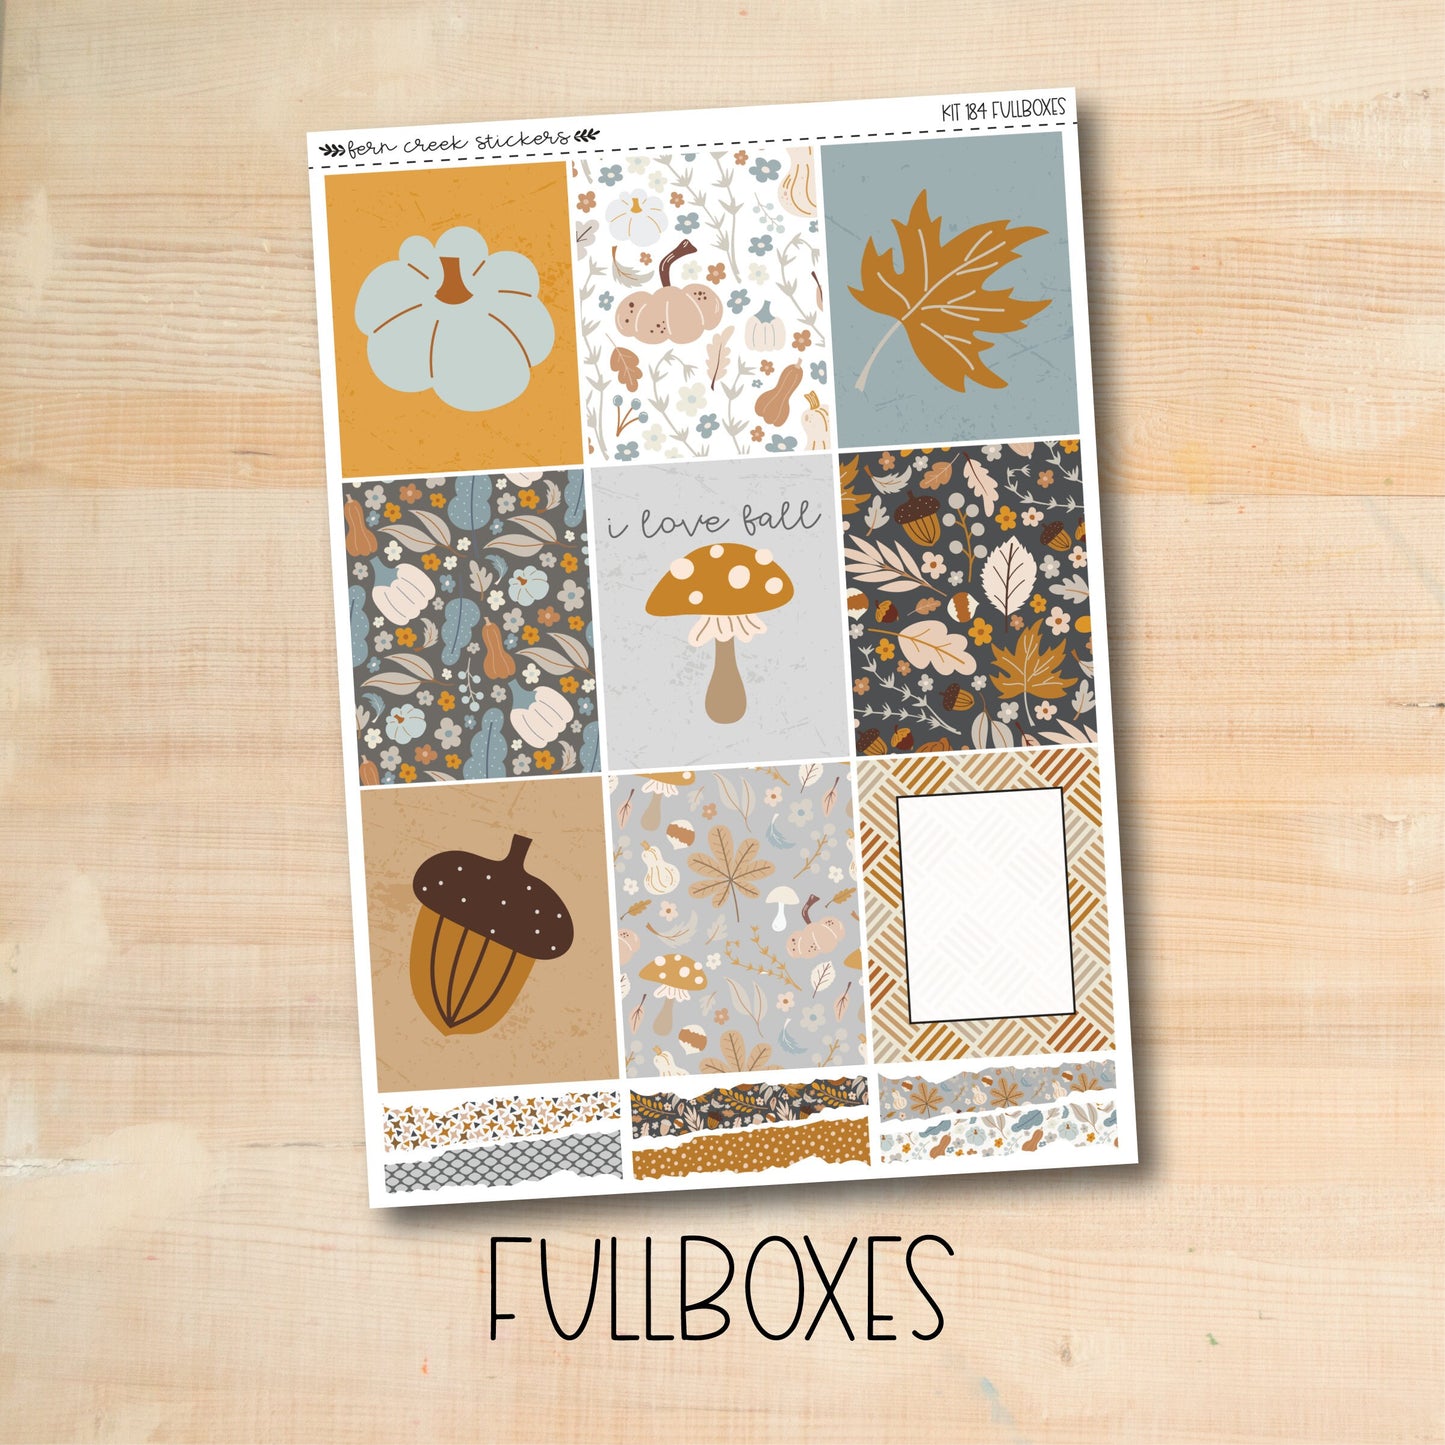 KIT-184 || AUTUMN DREAMS weekly planner kit for Erin Condren, Plum Paper, MakseLife and more!